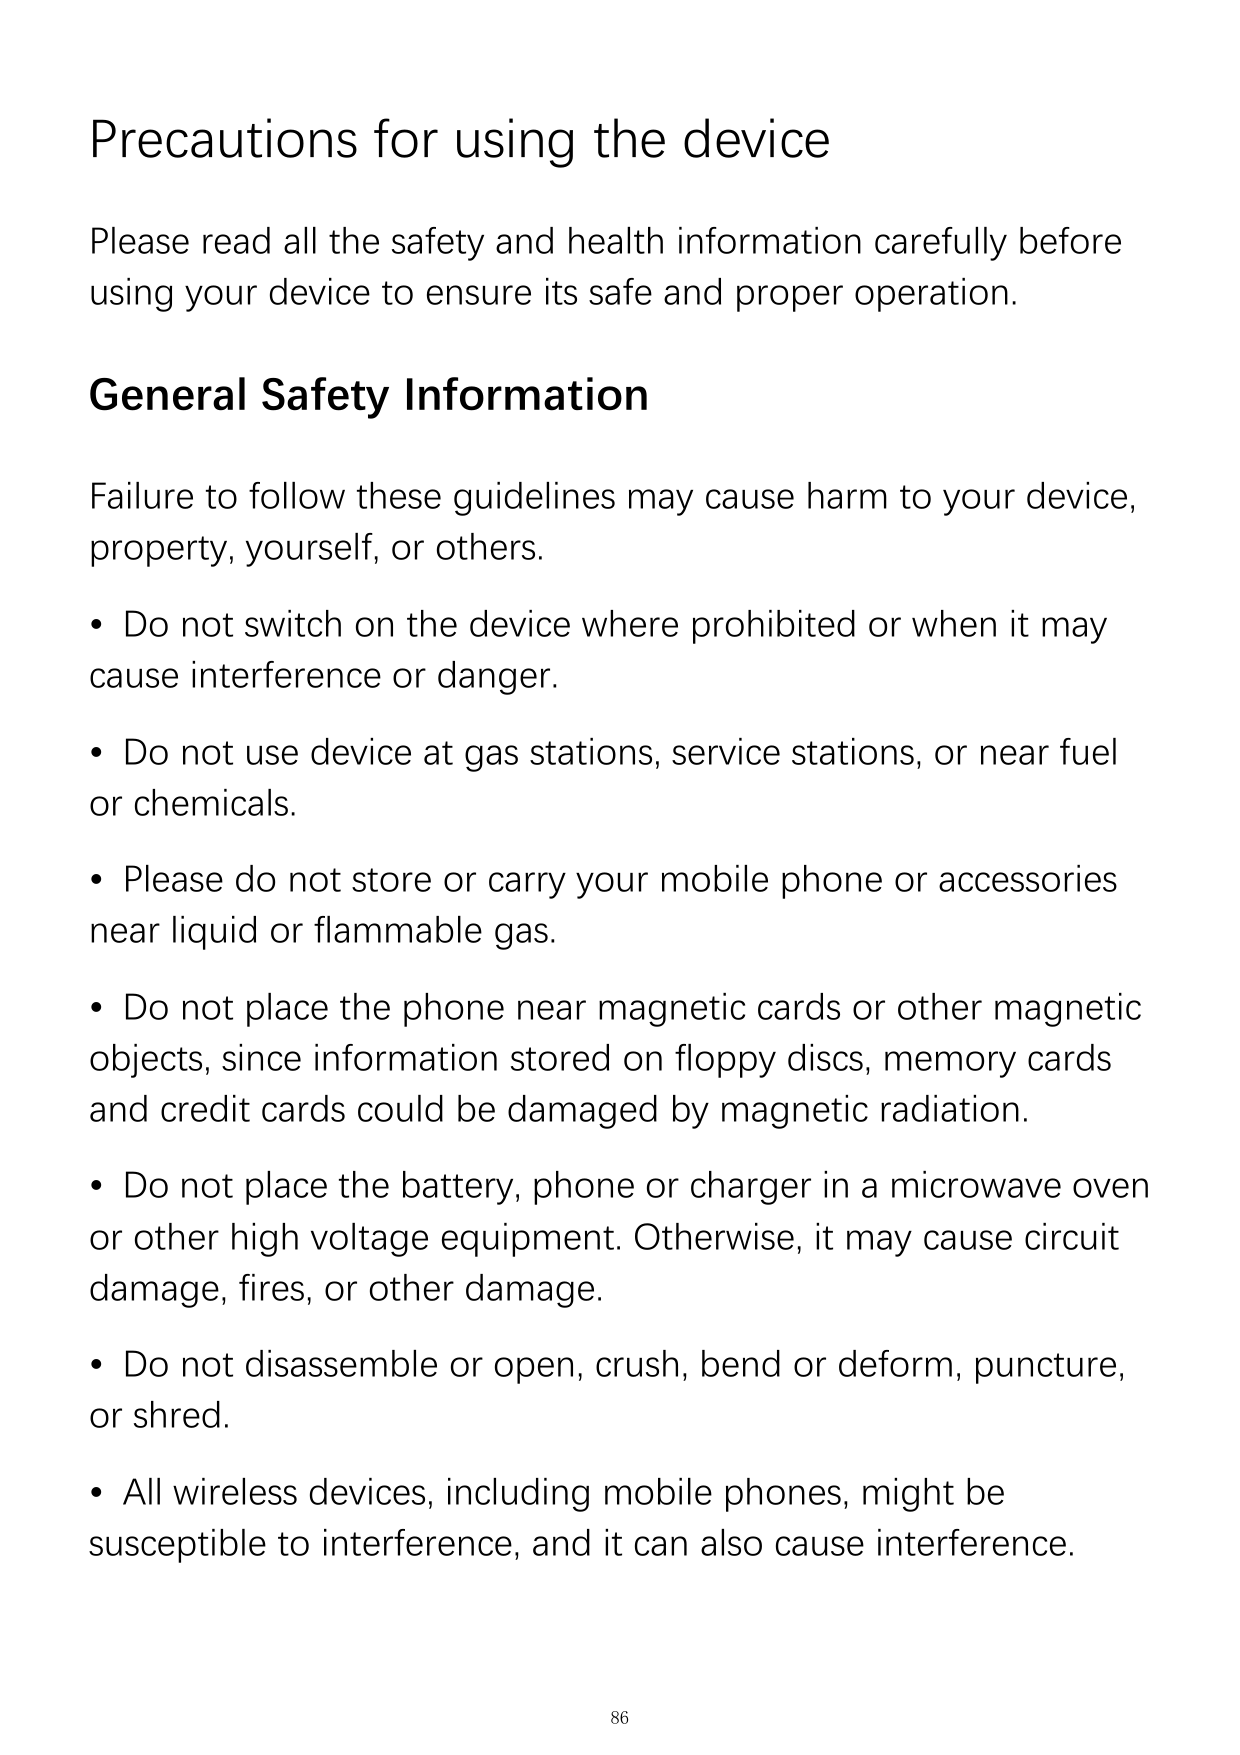 Precautions for using the devicePlease read all the safety and health information carefully beforeusing your device to ensure it